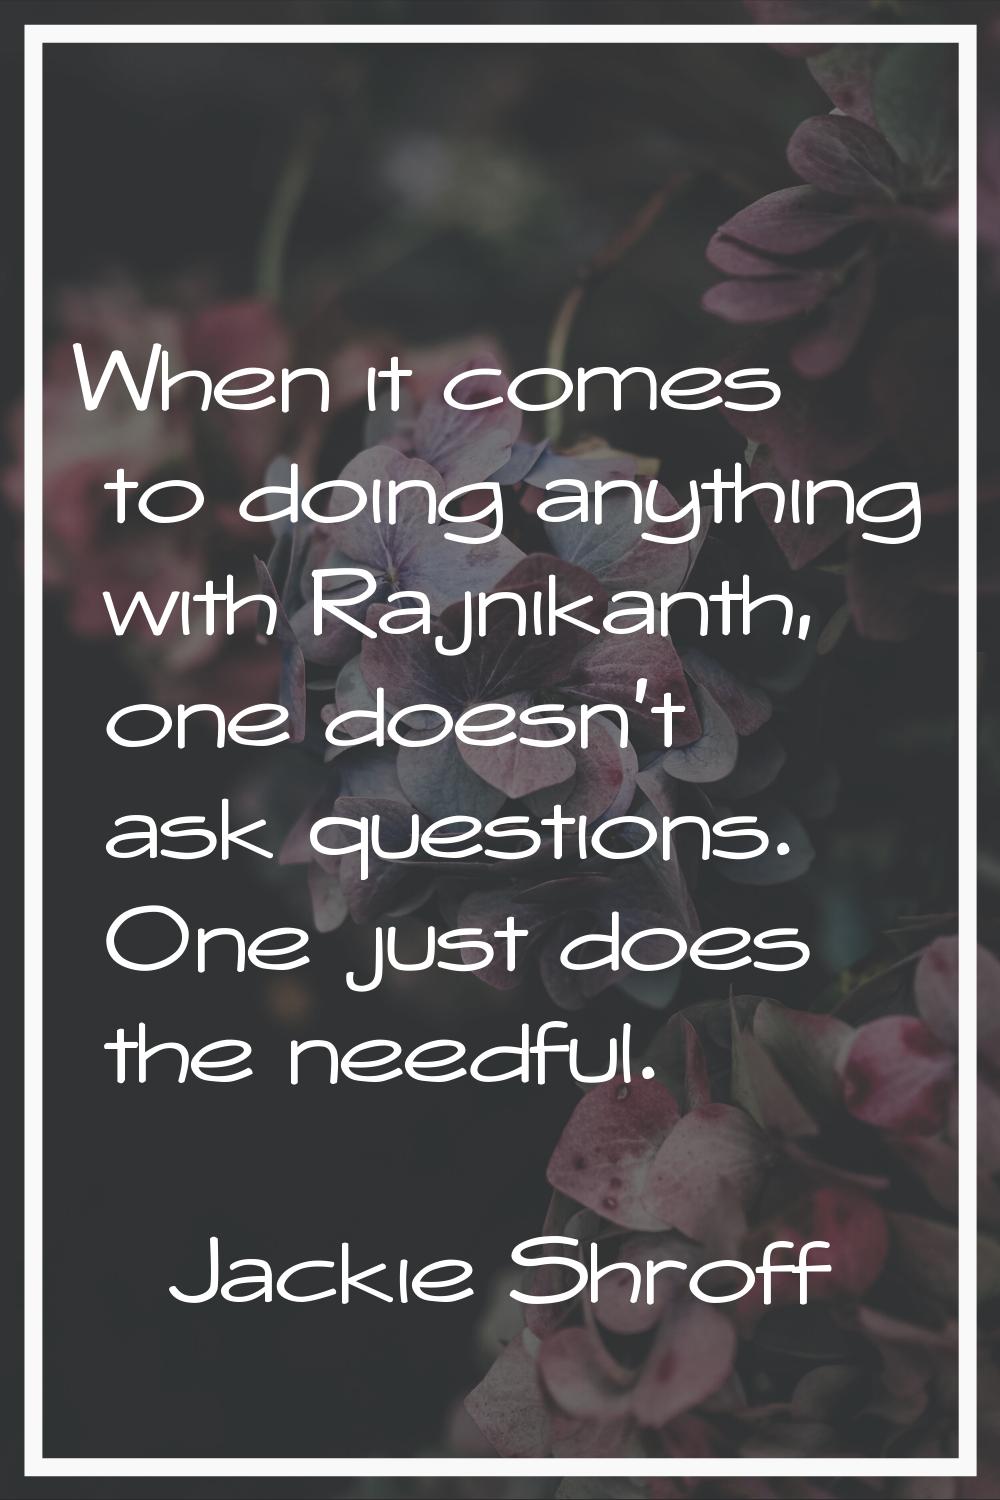 When it comes to doing anything with Rajnikanth, one doesn't ask questions. One just does the needf